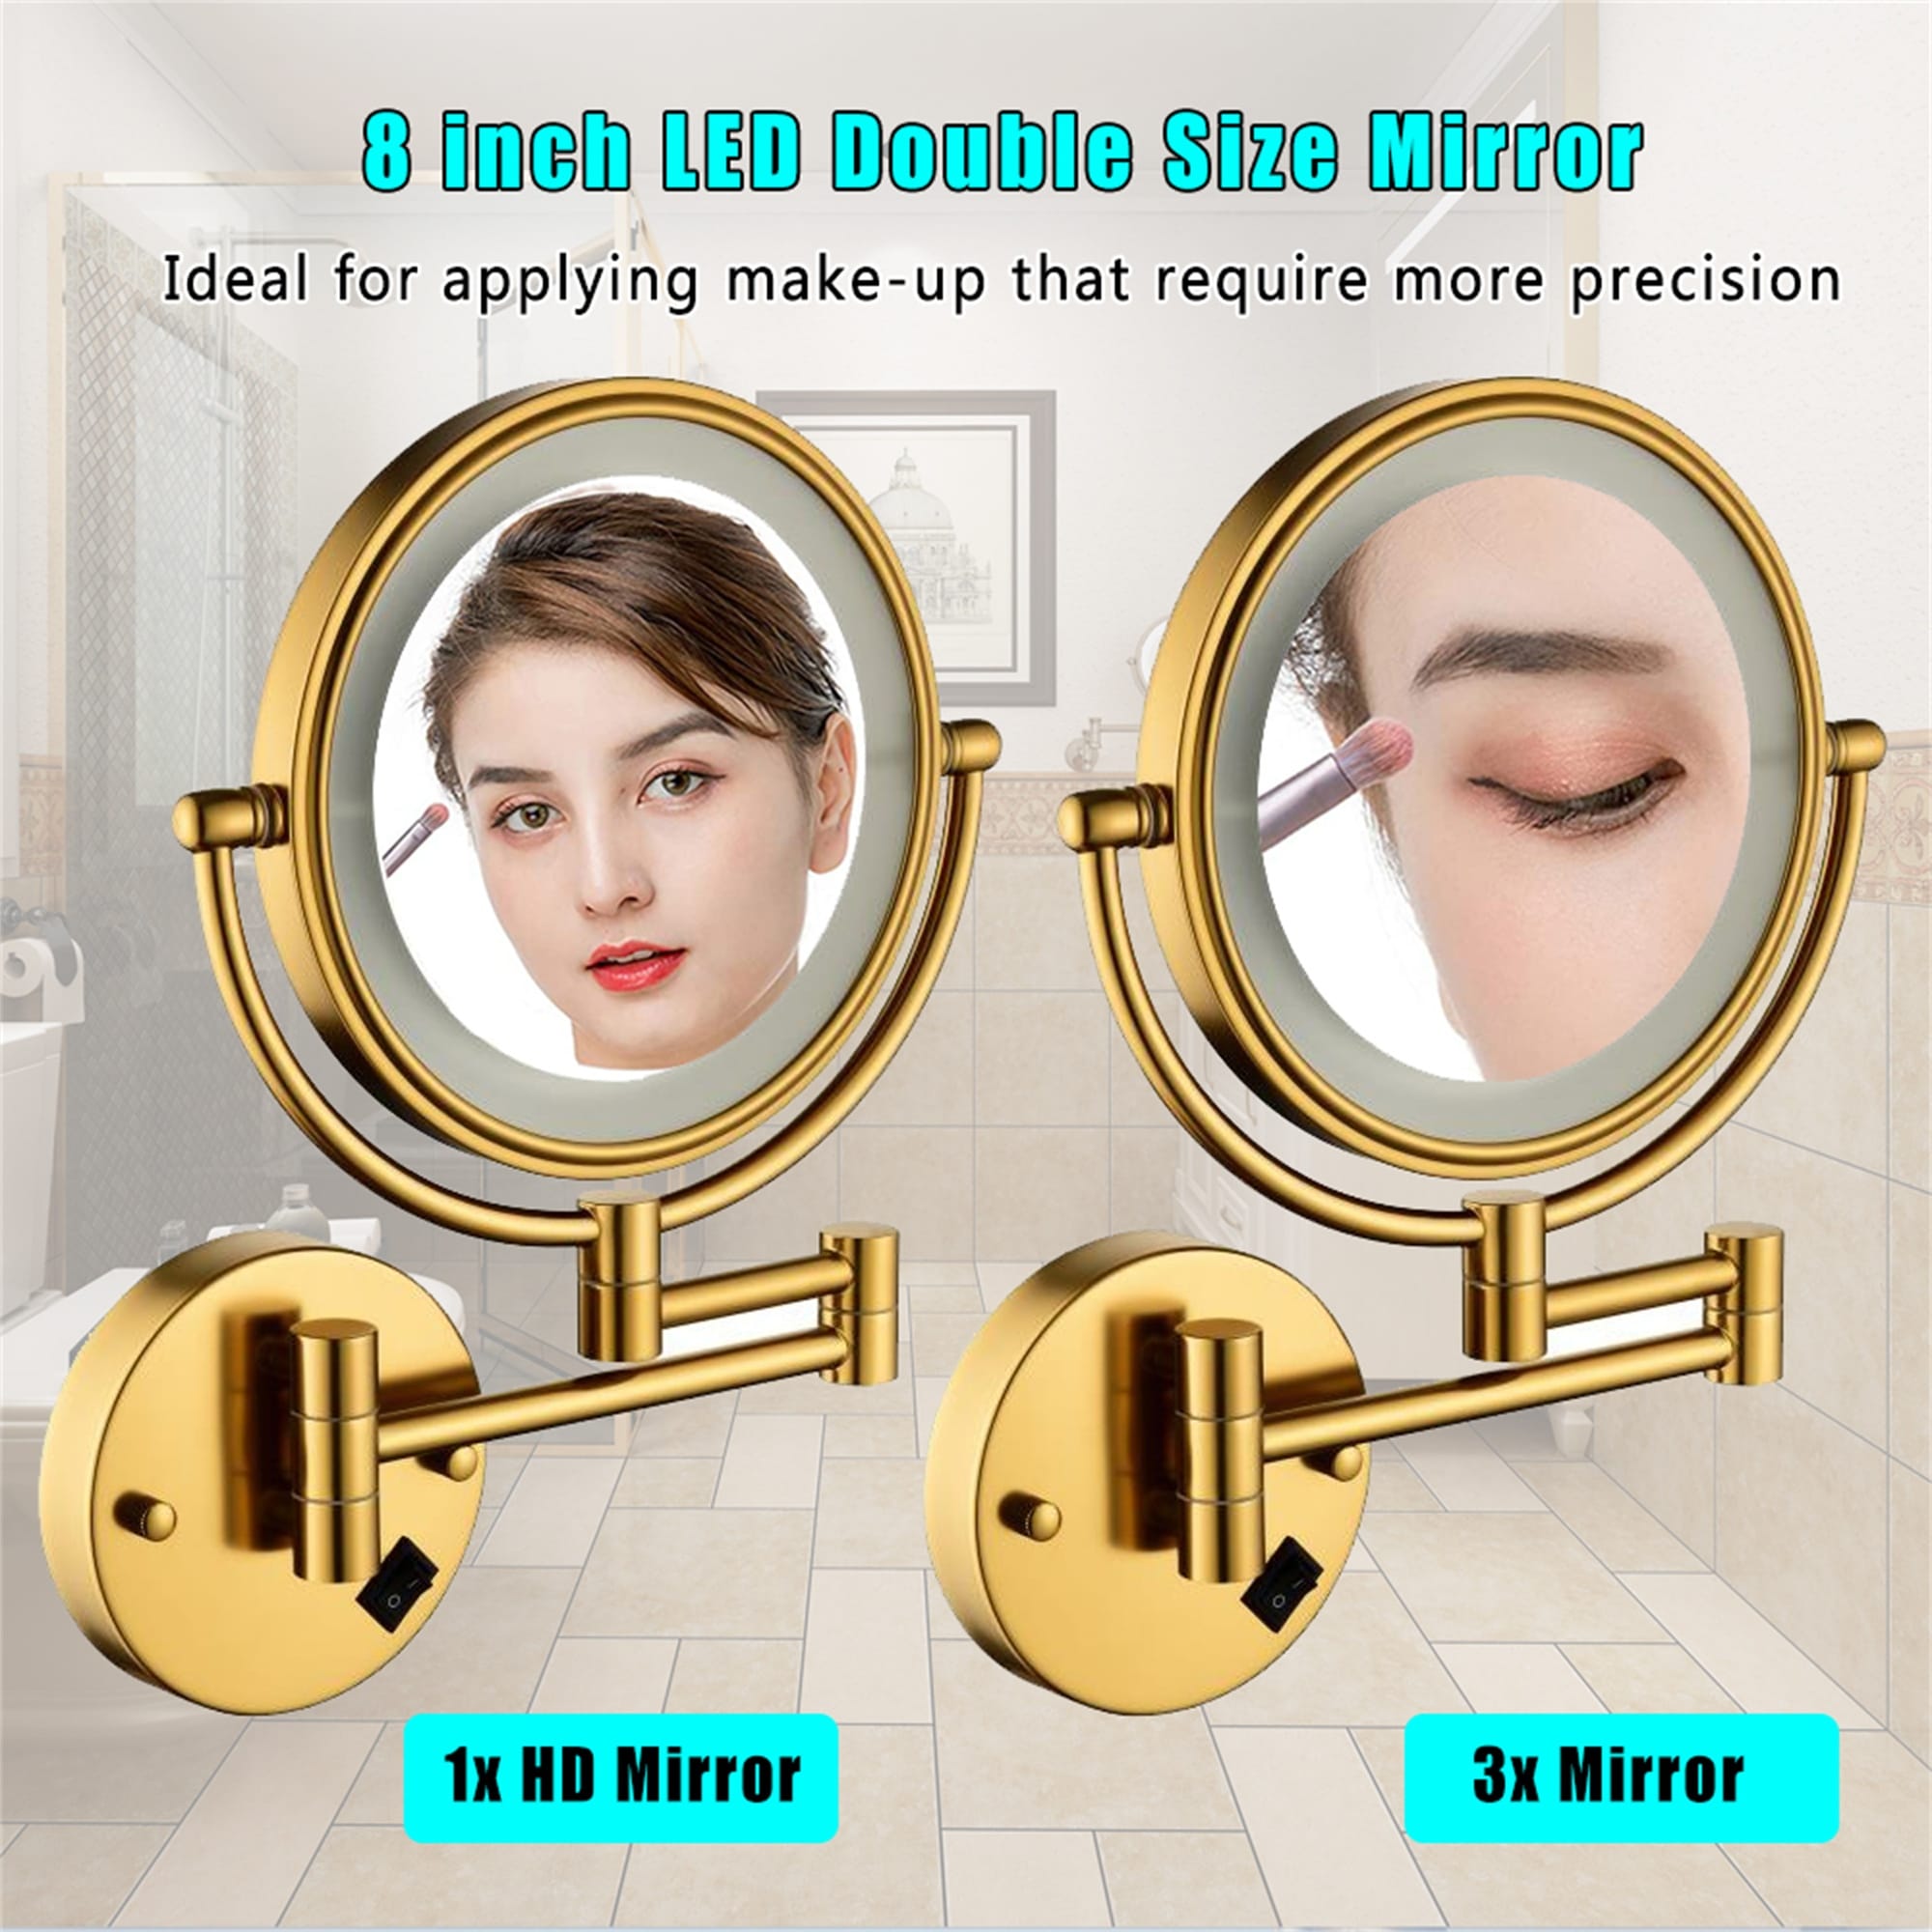 10X Magnifying Wall Mounted Makeup Mirror 8 Double Sided Vanity Bathroom  Mirror